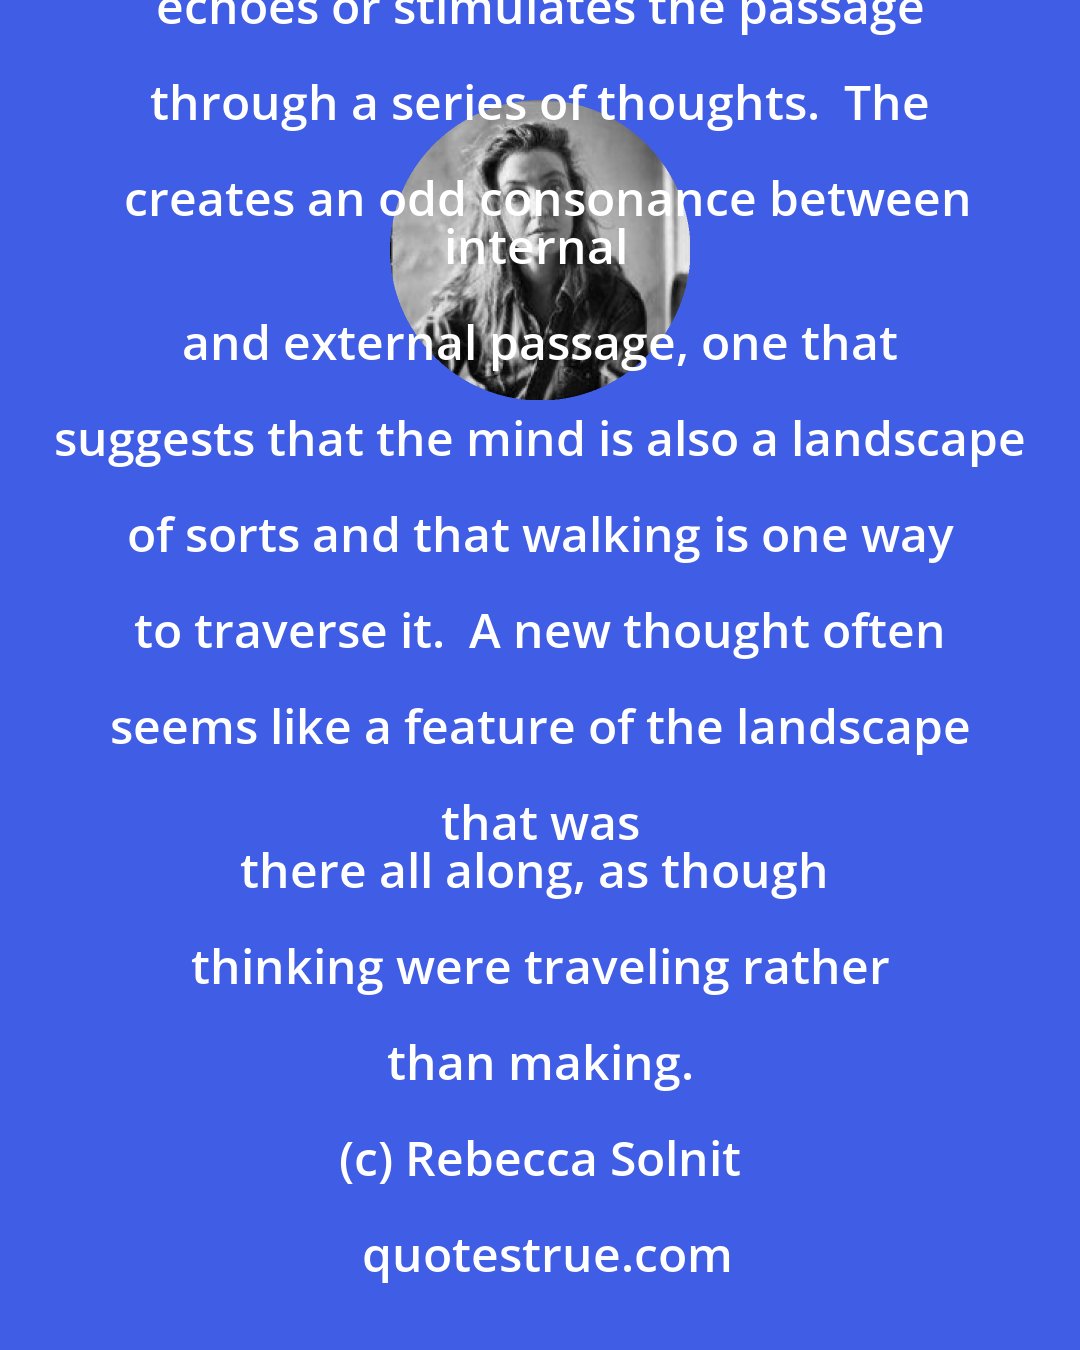 Rebecca Solnit: The rhythm of walking generates a kind of rhythm of thinking, and the passage through a landscape echoes or stimulates the passage through a series of thoughts.  The creates an odd consonance between
internal and external passage, one that suggests that the mind is also a landscape of sorts and that walking is one way to traverse it.  A new thought often seems like a feature of the landscape that was 
there all along, as though thinking were traveling rather than making.